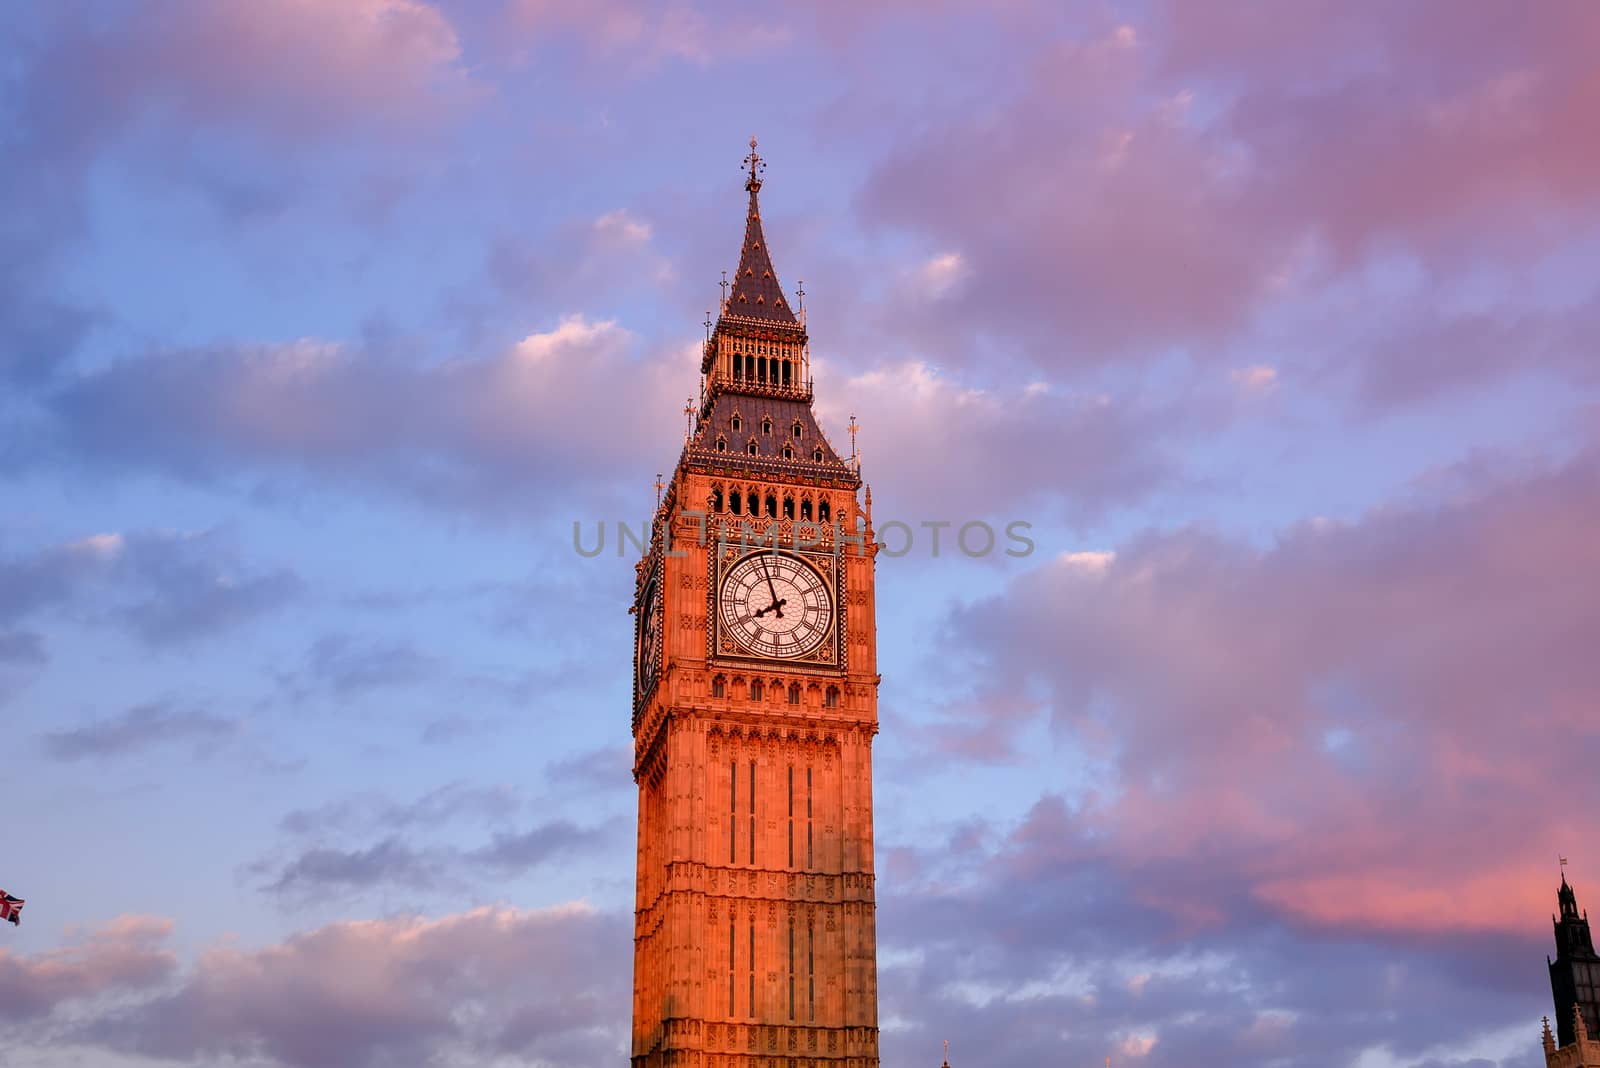 Big Ben and Westminster abbey in London, England by Alicephoto